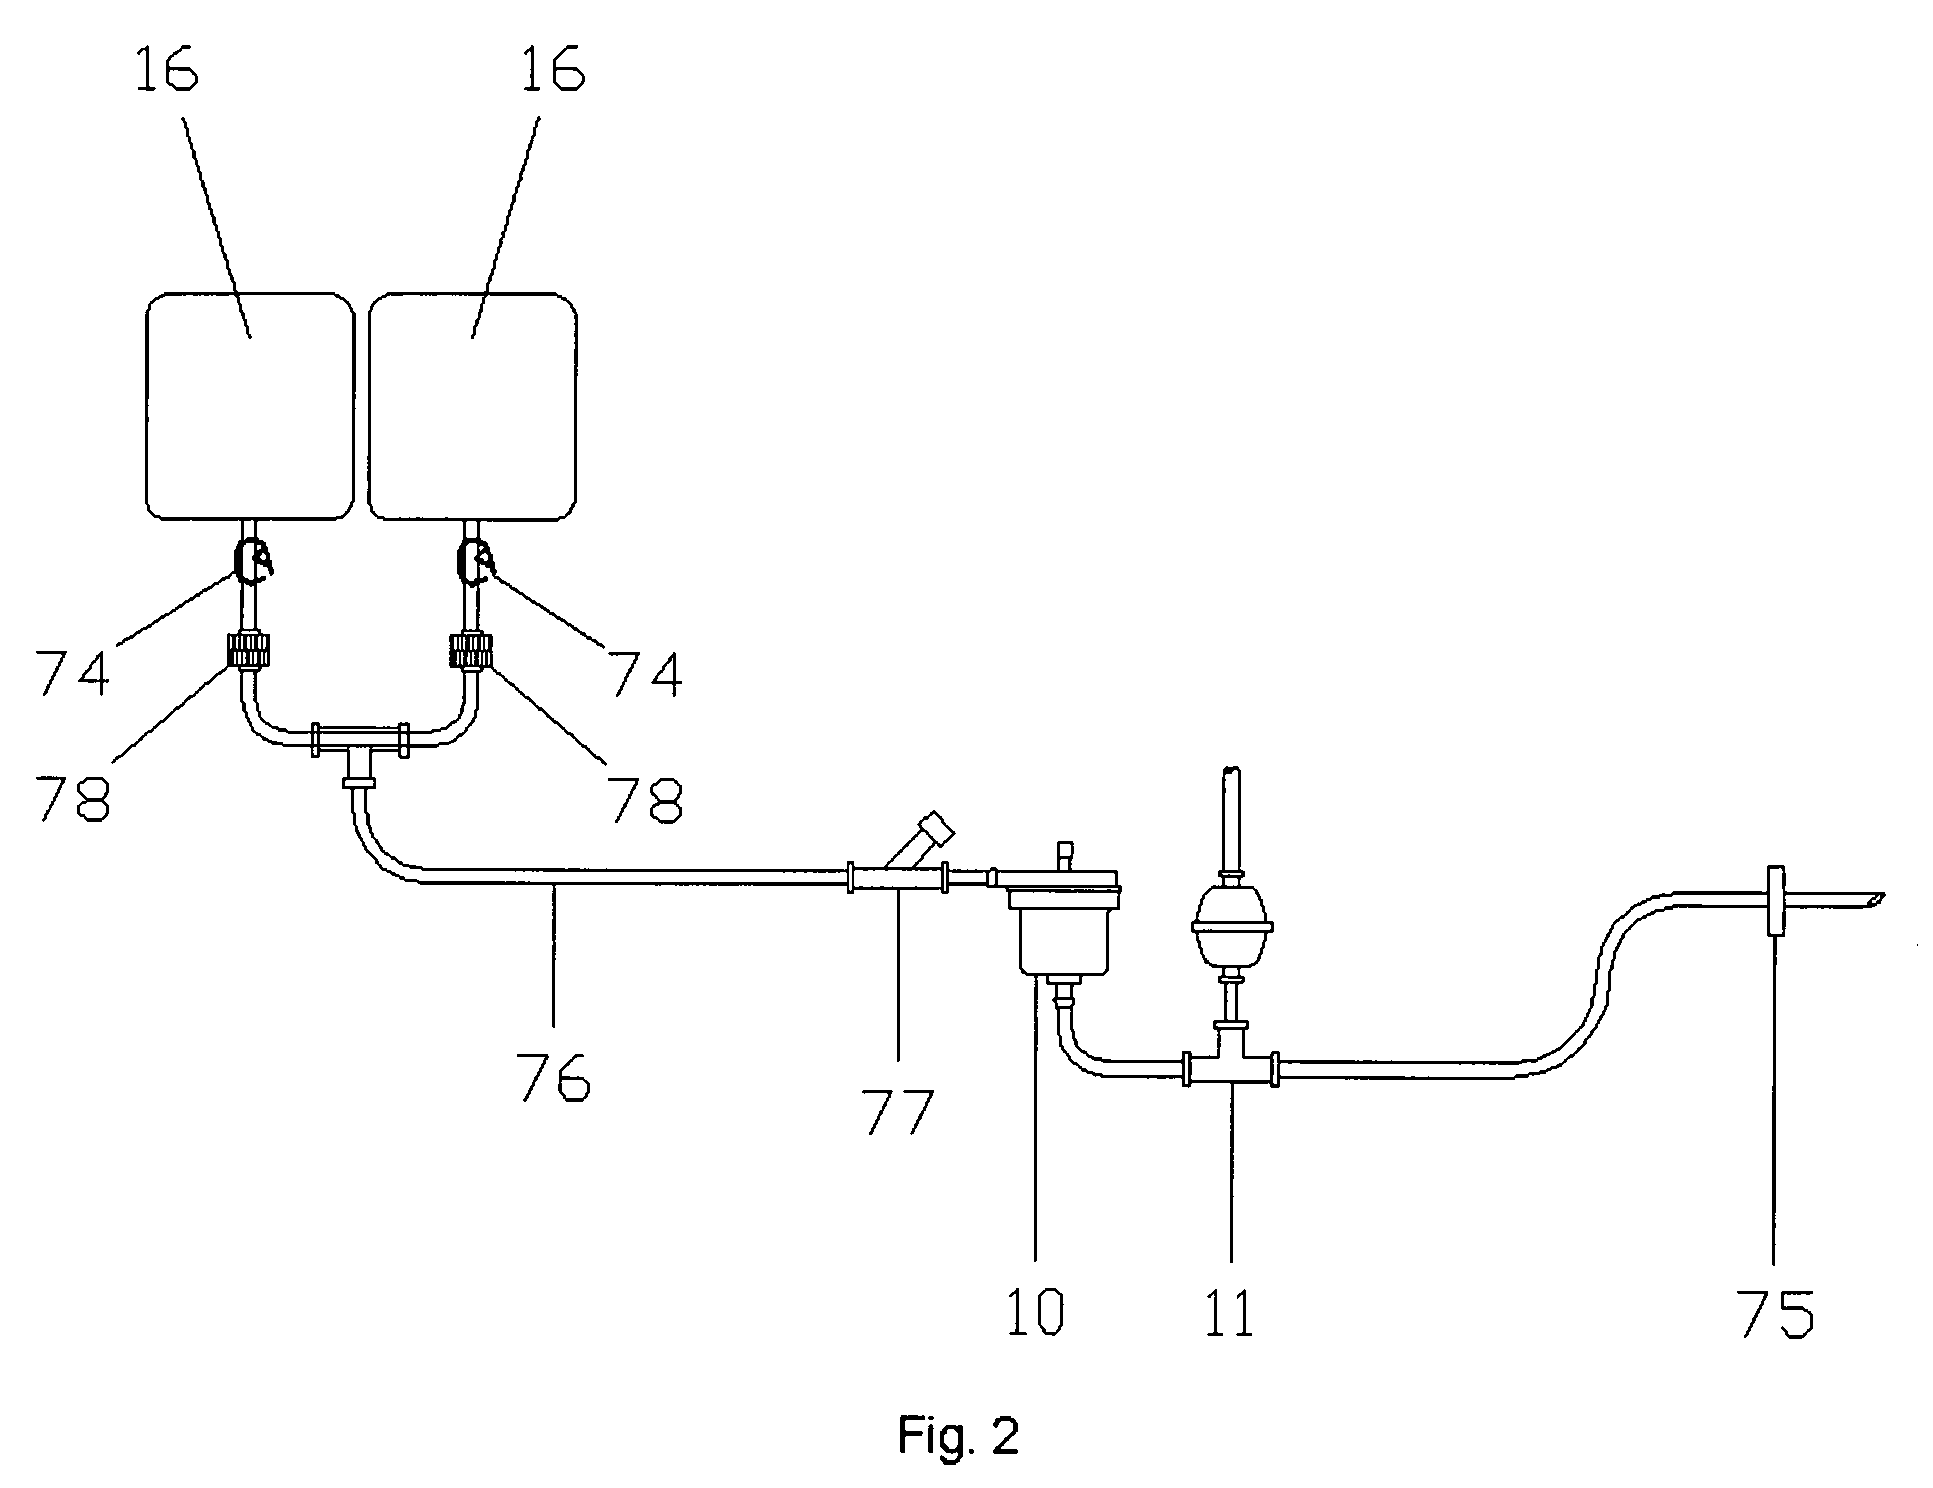 Apparatus and Method for Inducing Suspended Animation Using Rapid, Whole Body, Profound Hypothermia